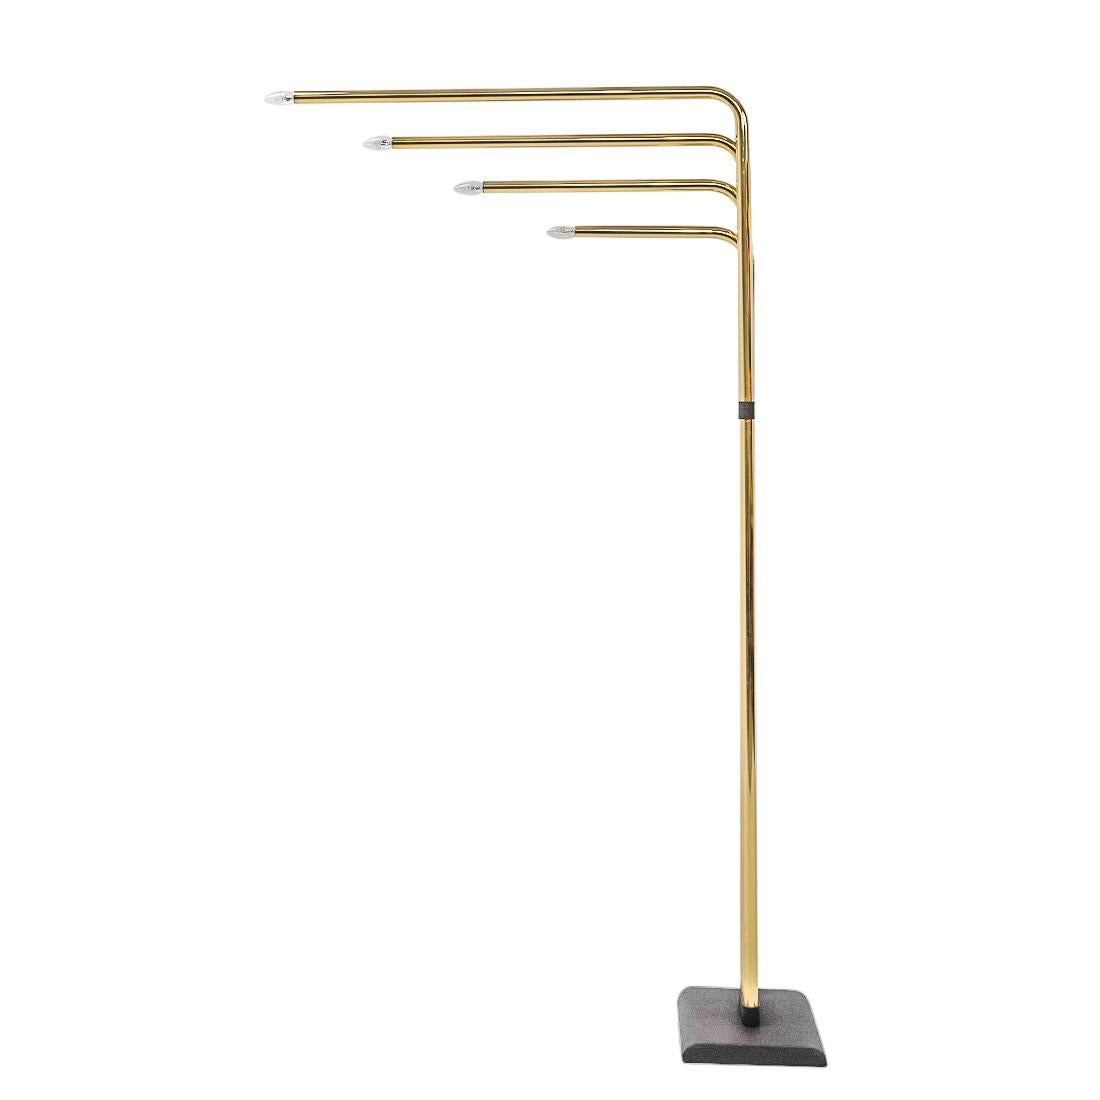 Four-armed, brass plated floor lamp by Goffredo Reggiani designed during the 1970s for Reggiani Illuminazione. 
The sculptural lamp remains in very good vintage condition, with some small signs of use on the finish. The four metal arms can be moved